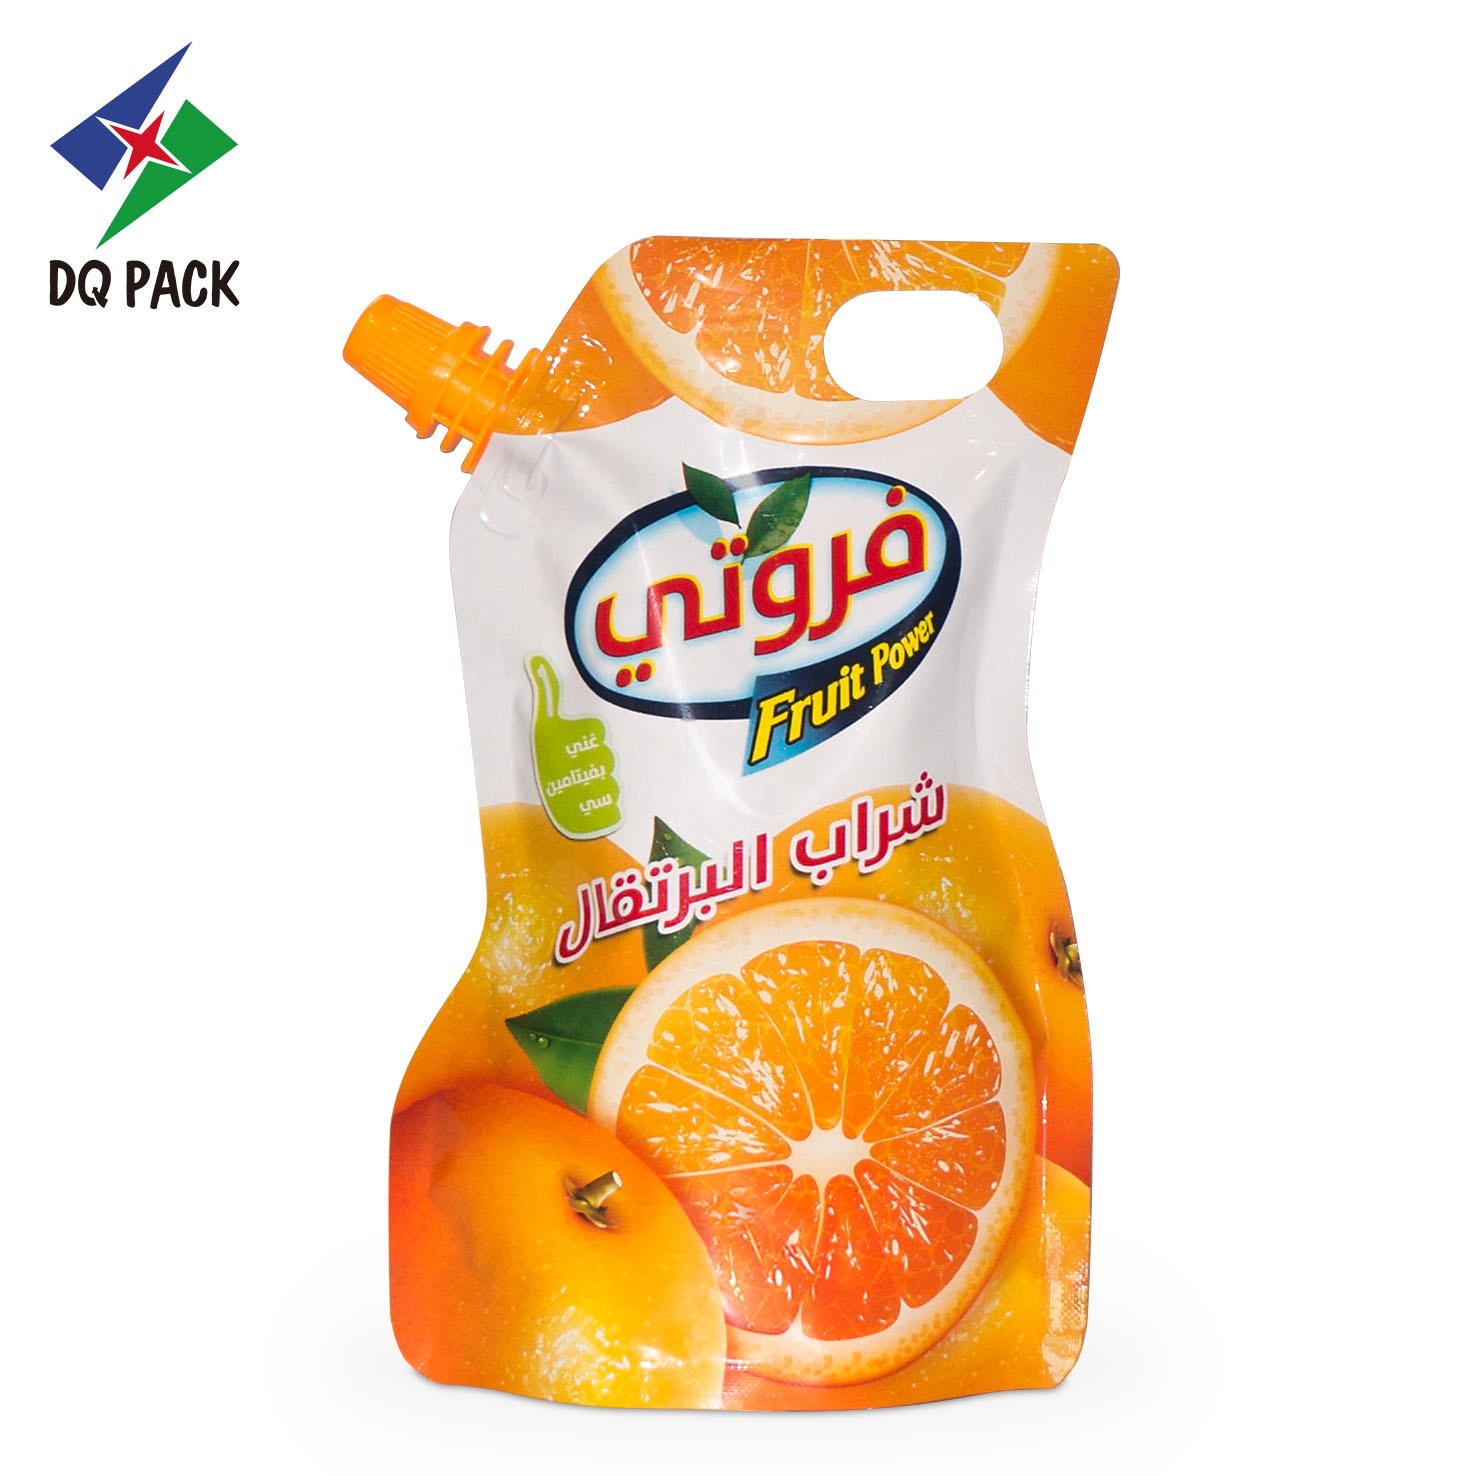 China Manufacture Custom Printed Stand Up Pouch With Spout For Juice And Drink Packaging